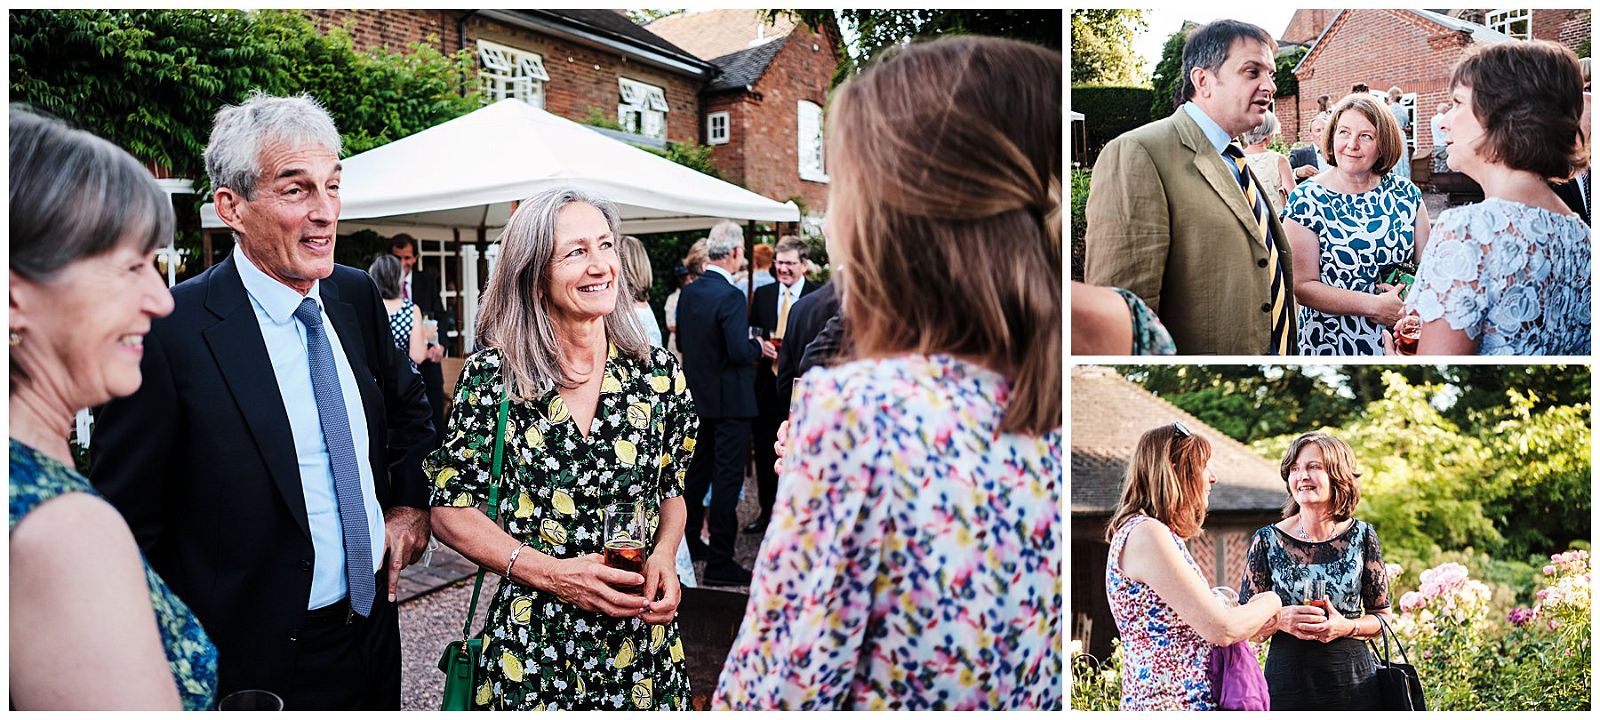 Reportage photographs capturing guests greeting each other for the wedding reception at Goldstone Hall in Shropshire by Documentary Wedding Photographer Stuart James